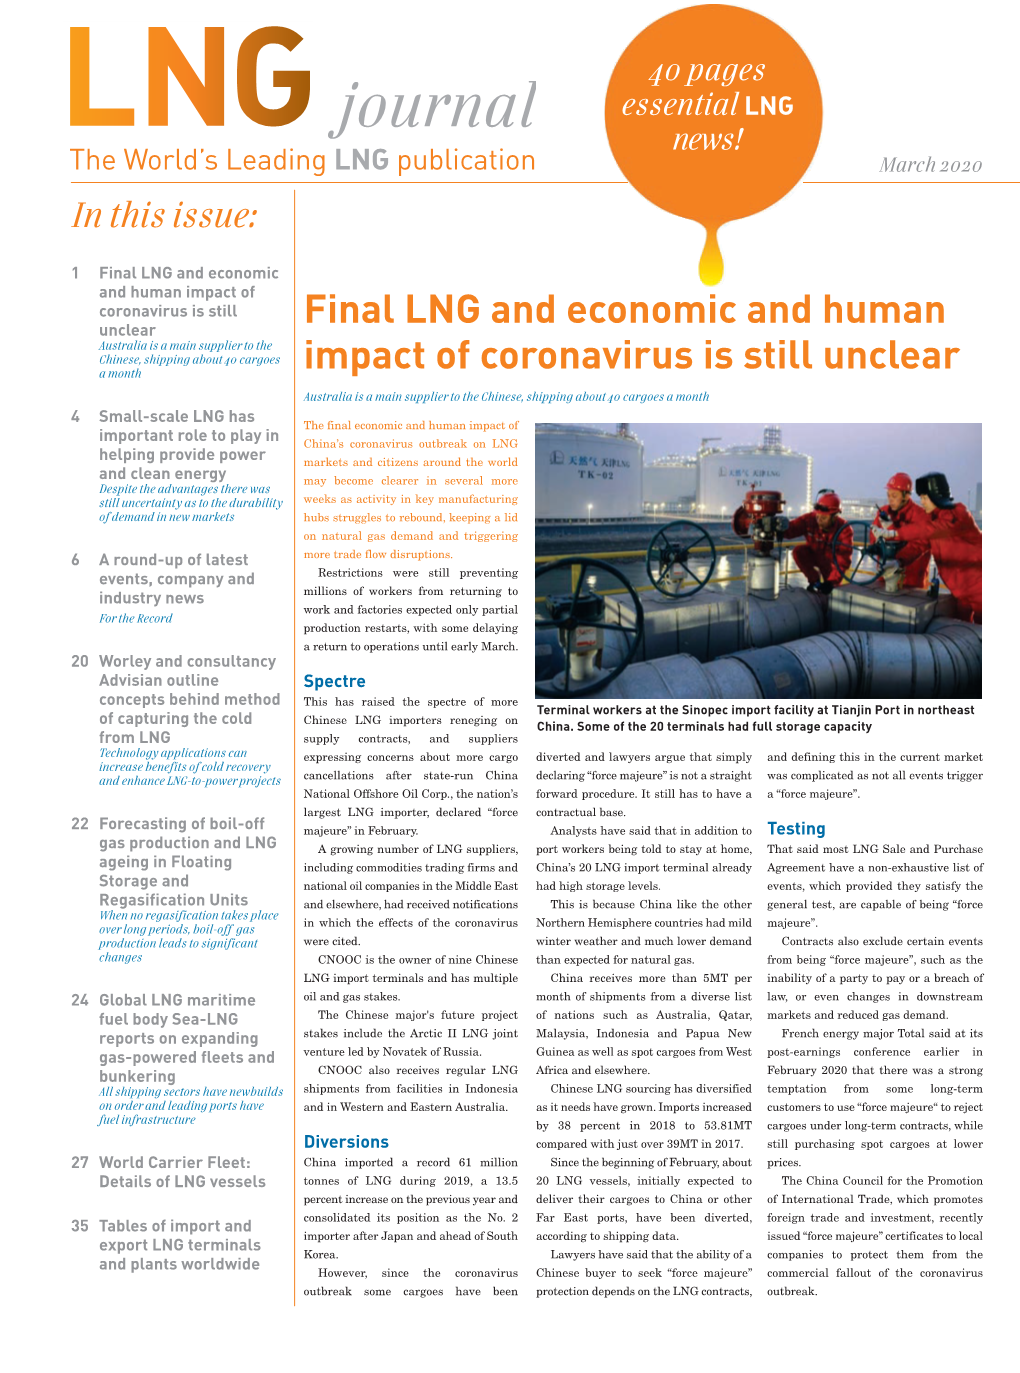 Final LNG and Economic and Human Impact of Coronavirus Is Still Unclear